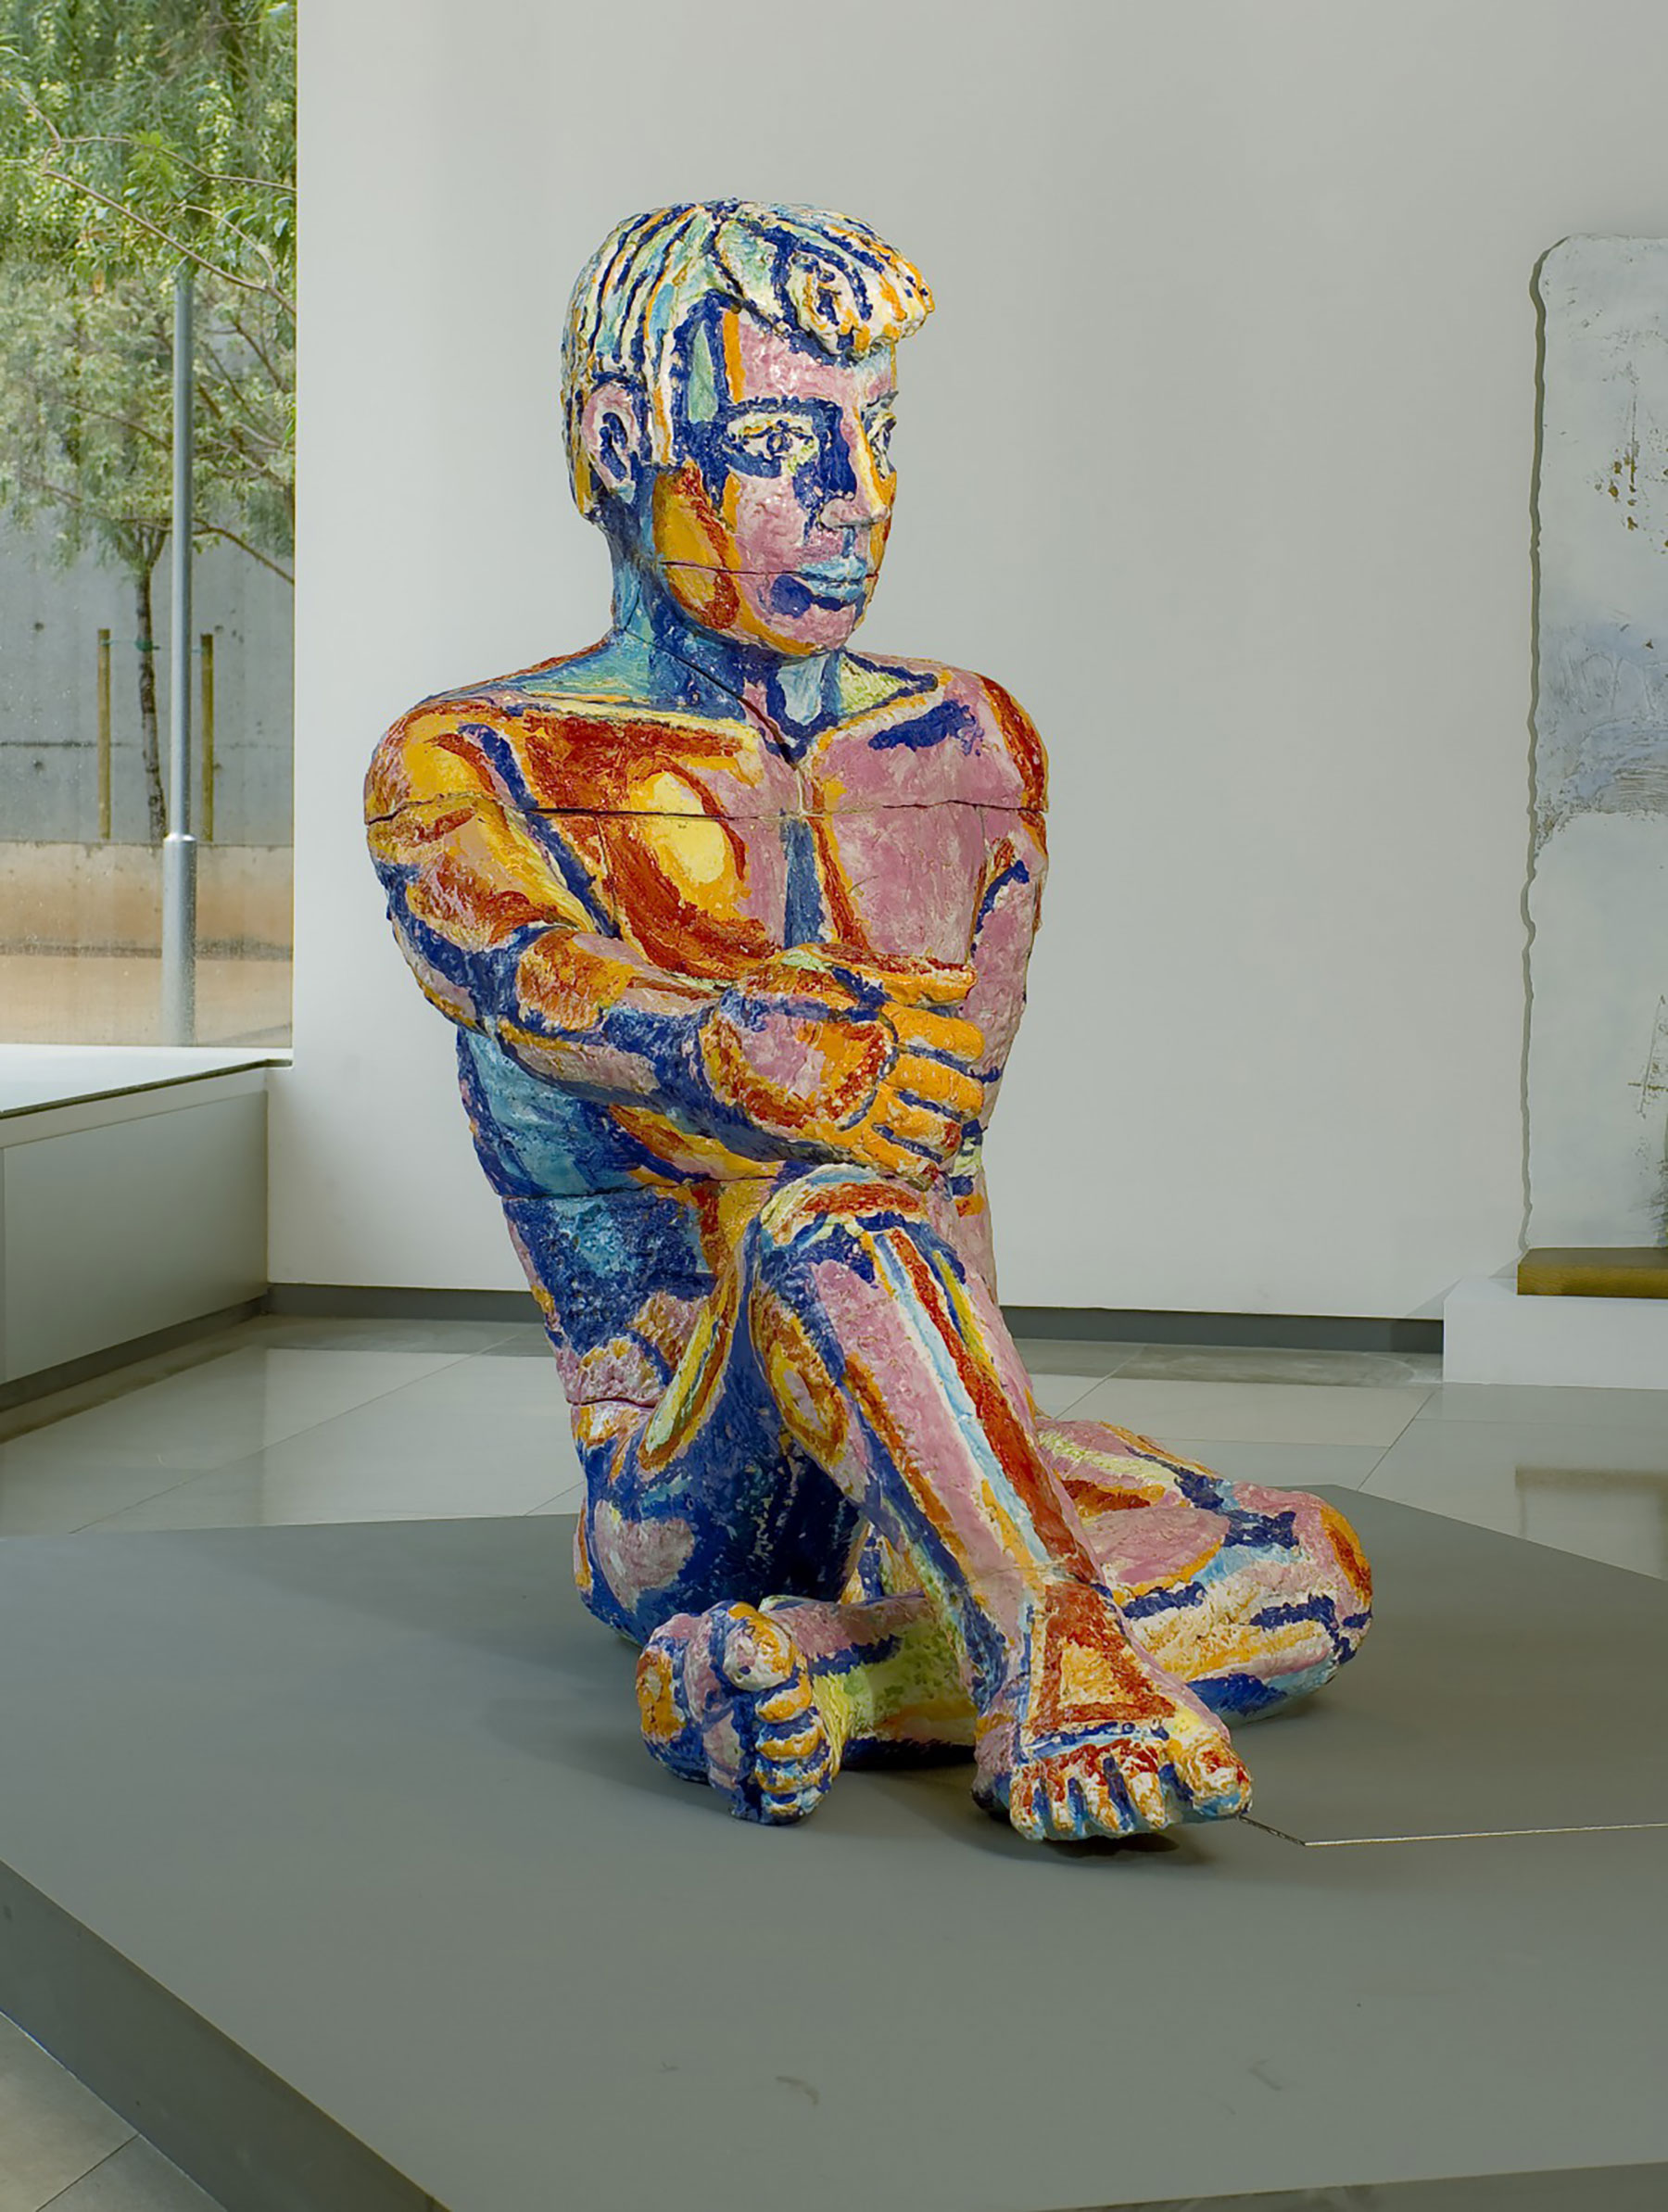 Viola Frey, Nude Man, 1989. Glazed ceramic. Gift of Stéphane Janssen in honor of the Museum's 50th Anniversary. © 2020 Artists Rights Society (ARS), New York.